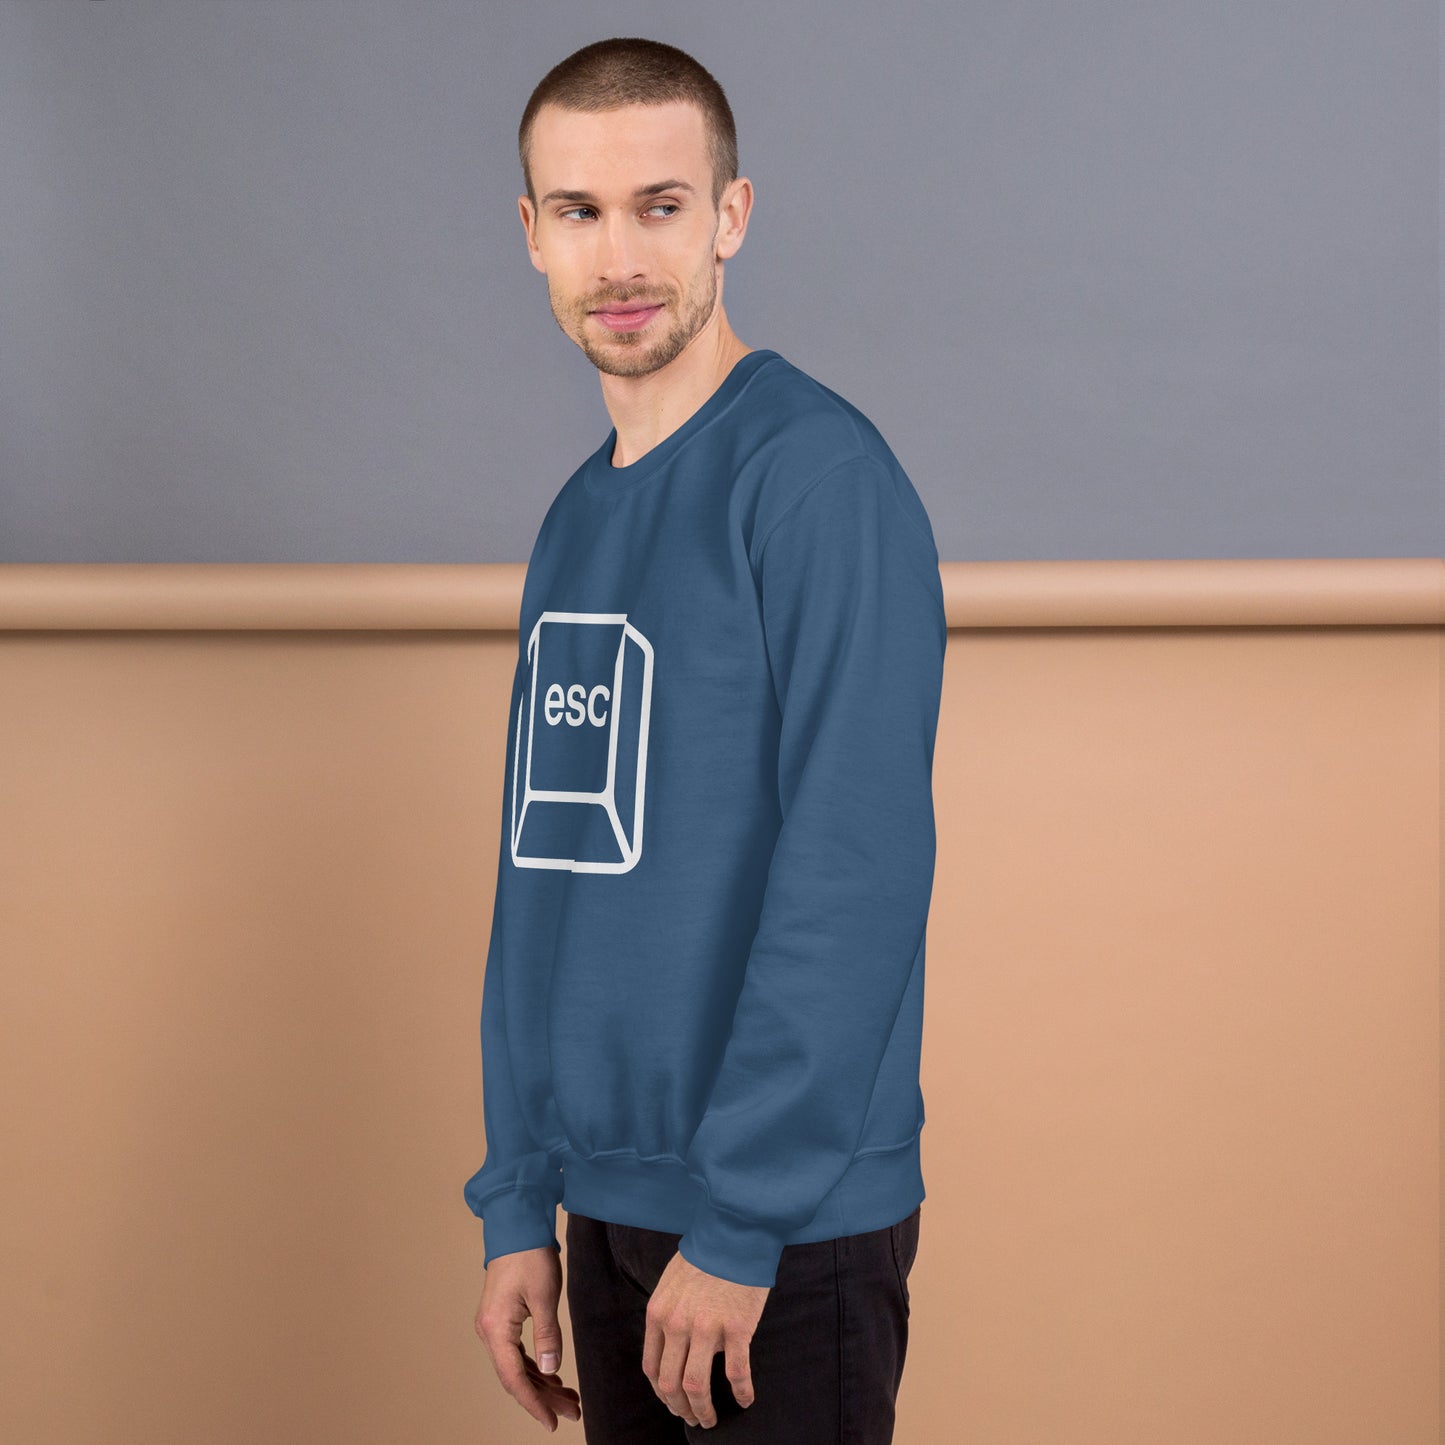 Man with indigo blue sweatshirt with picture of esc key